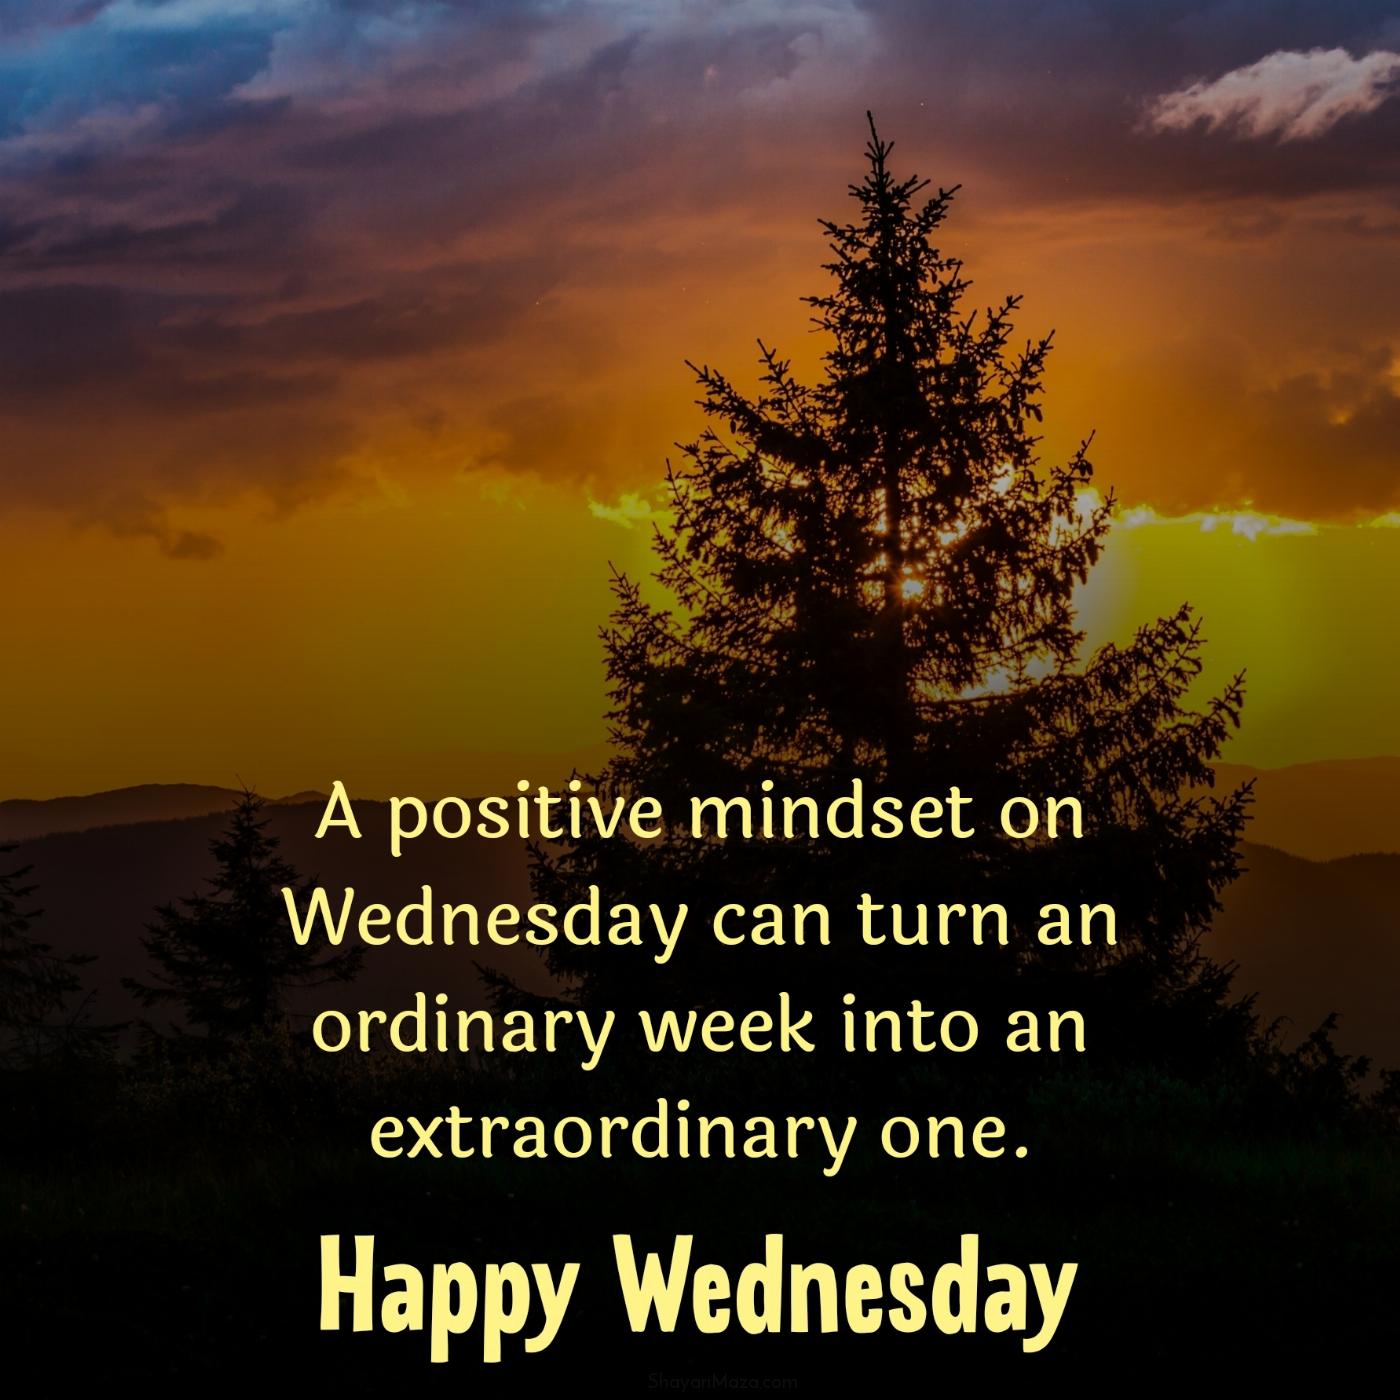 A positive mindset on Wednesday can turn an ordinary week